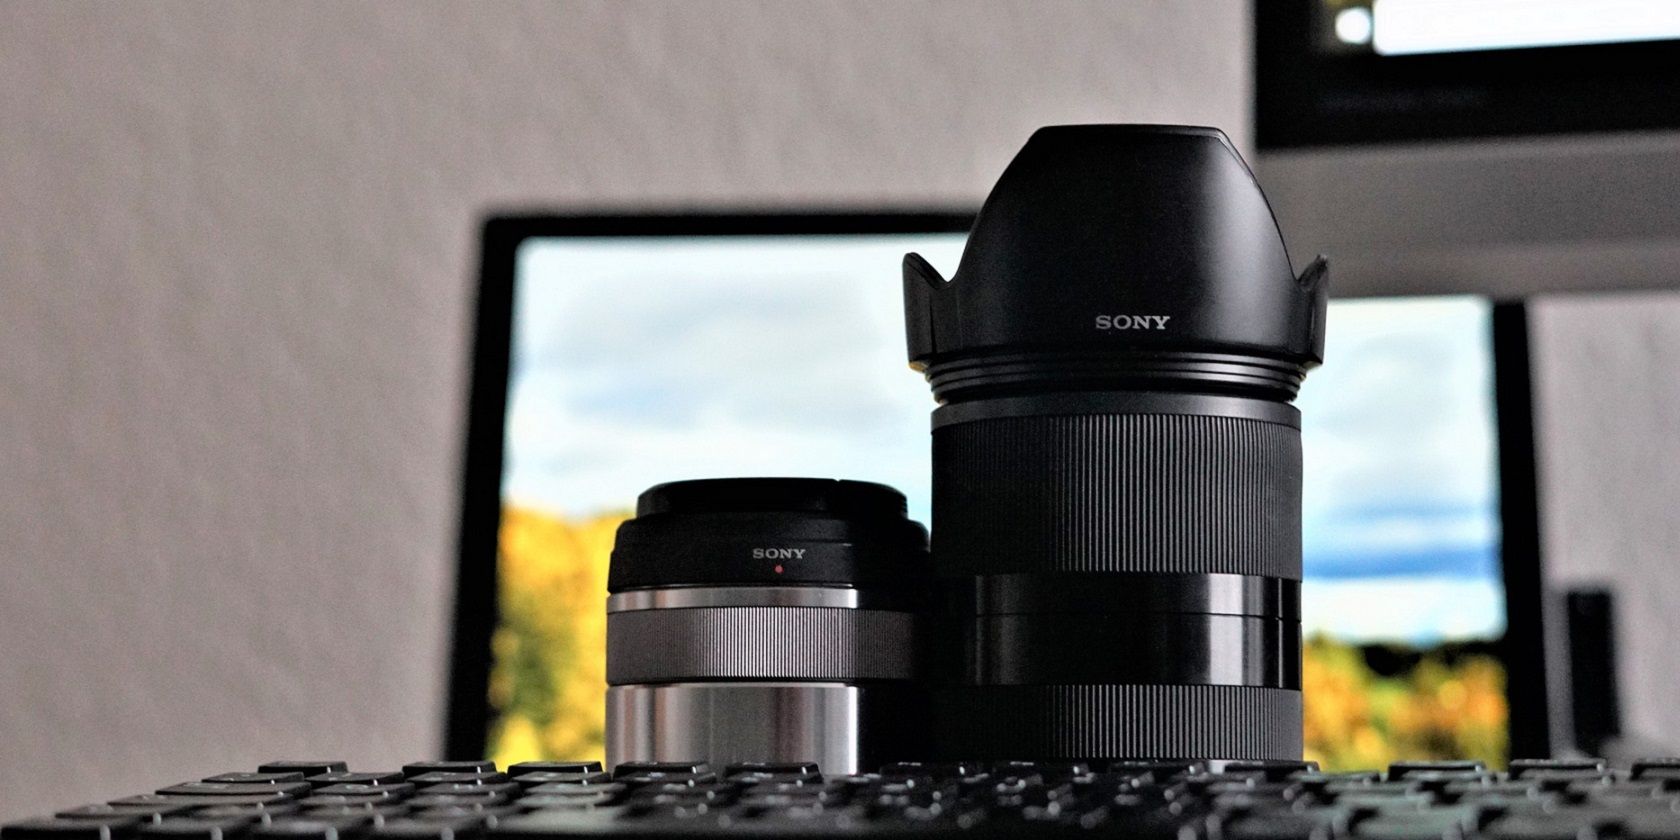 A camera lens and PC